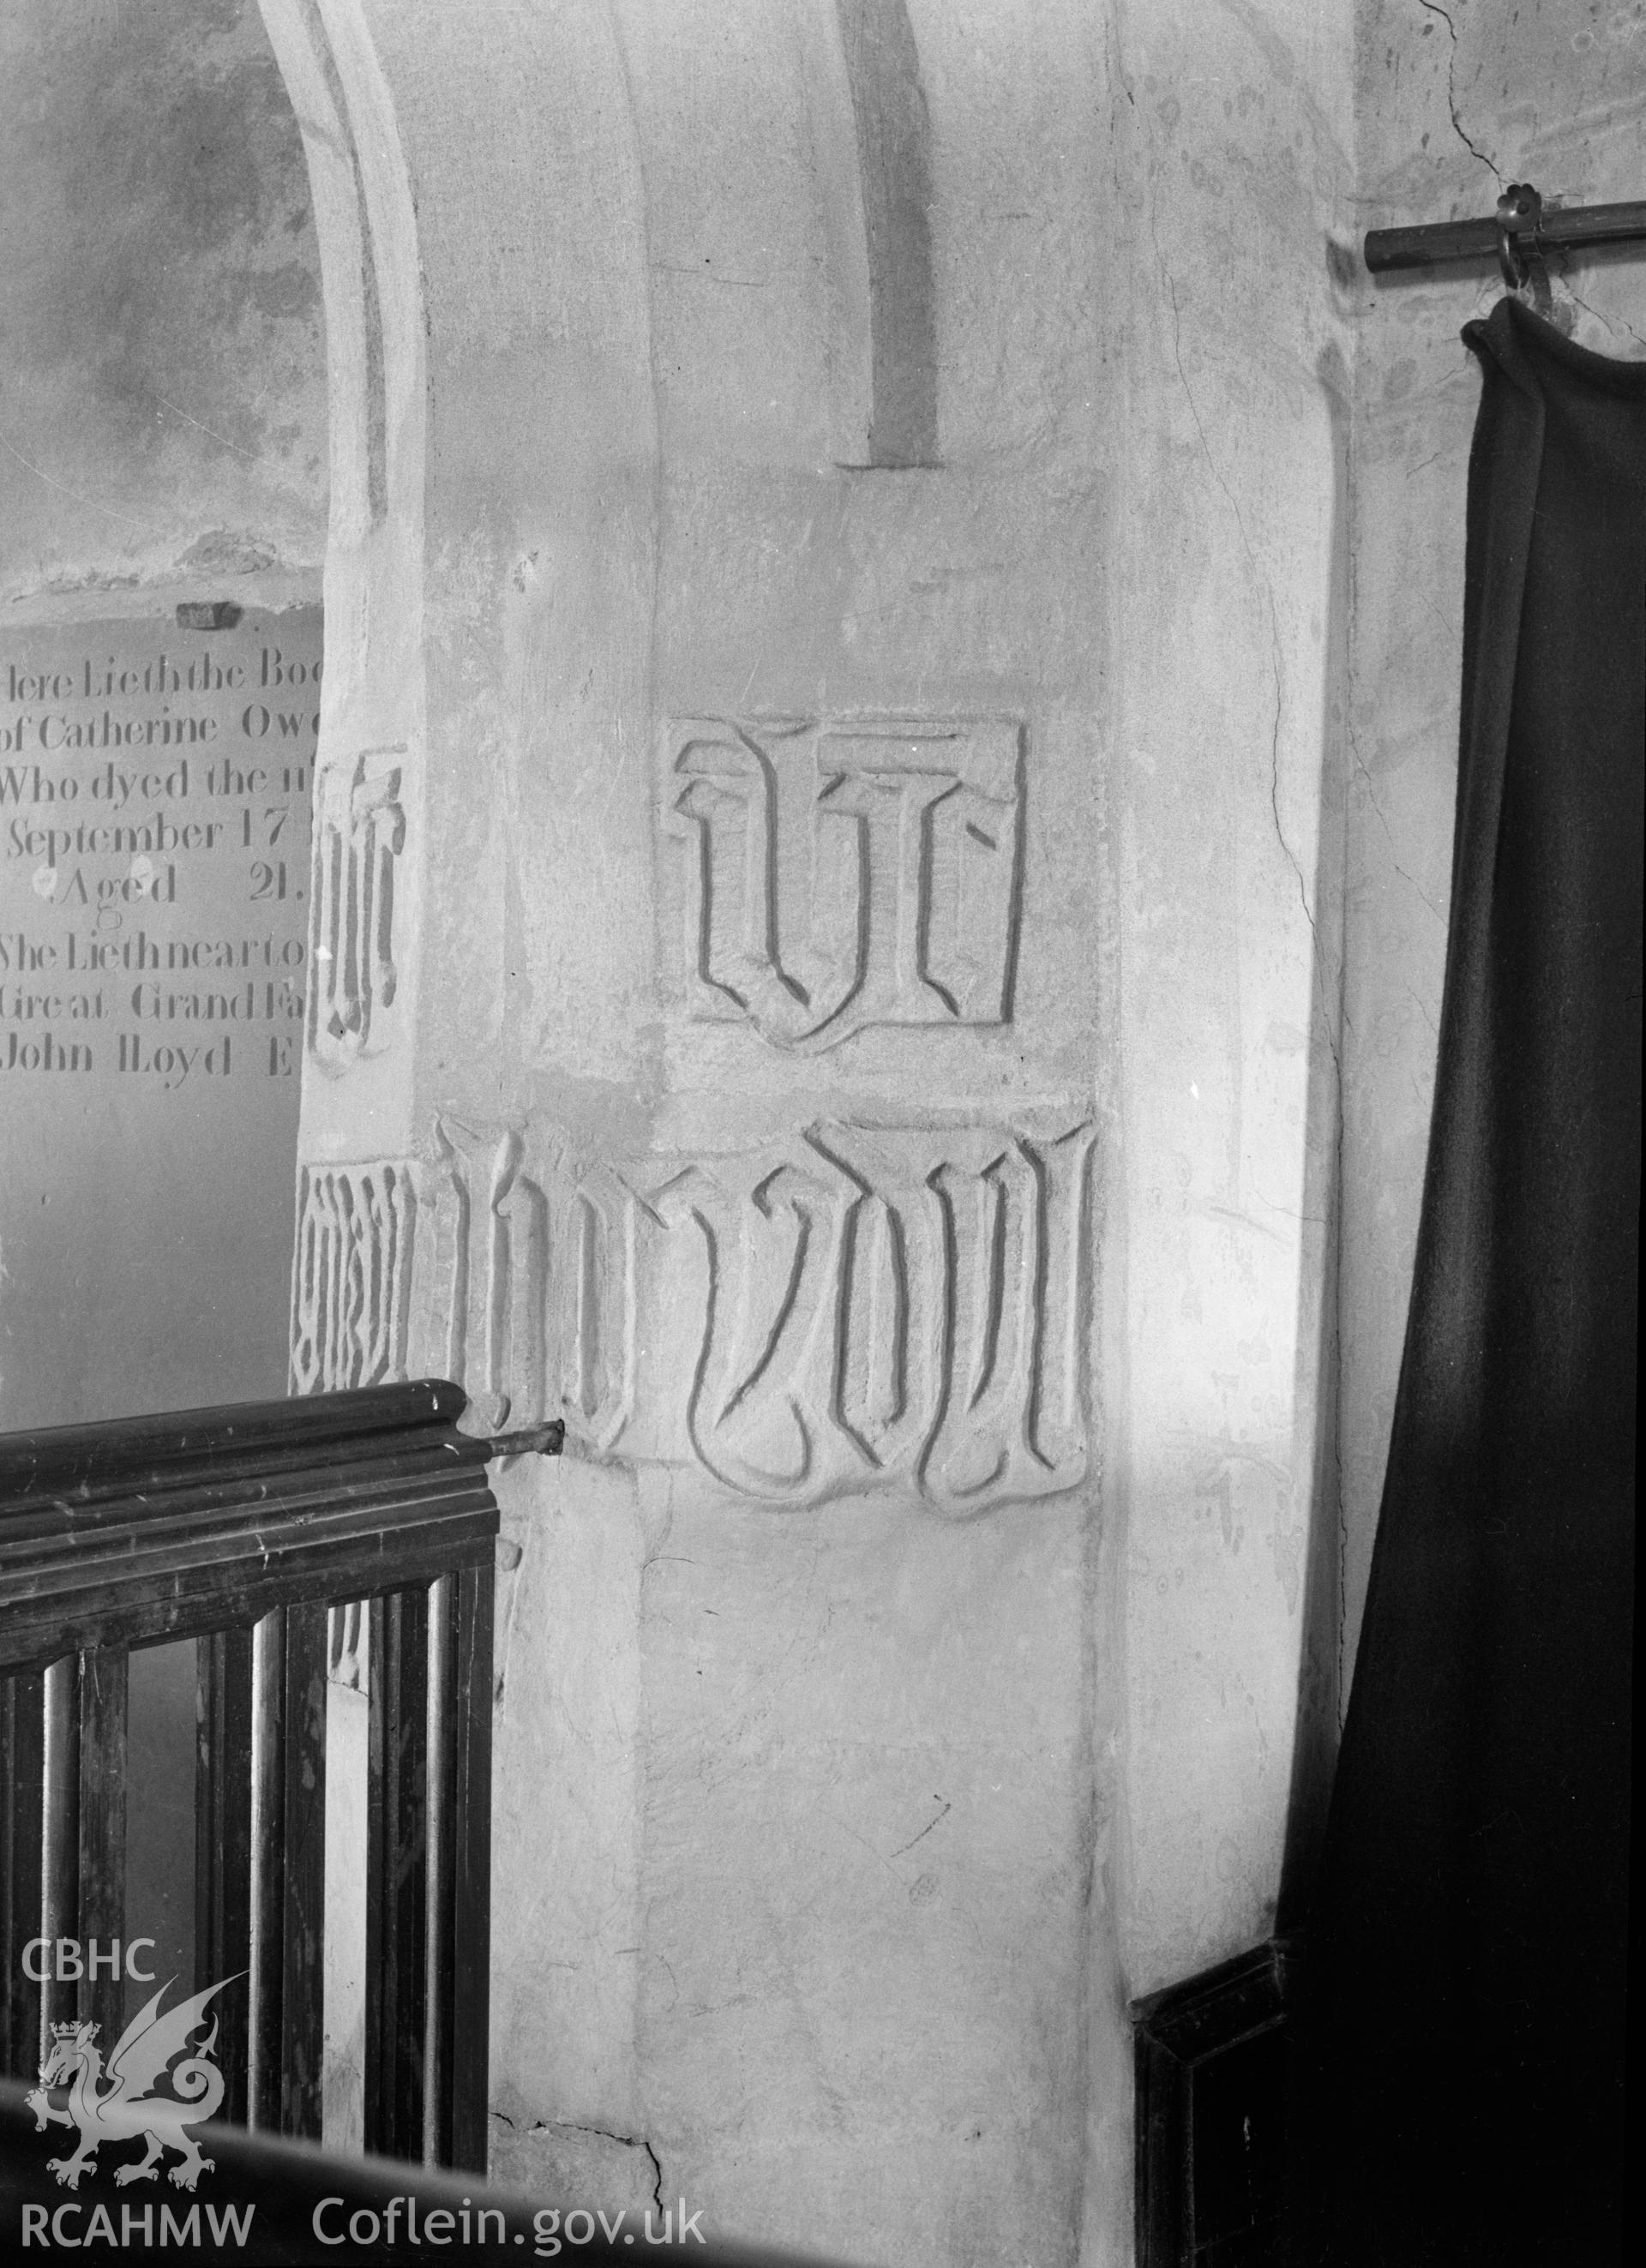 Black and white nitrate negative showing interior view of Llangwnadl Church.